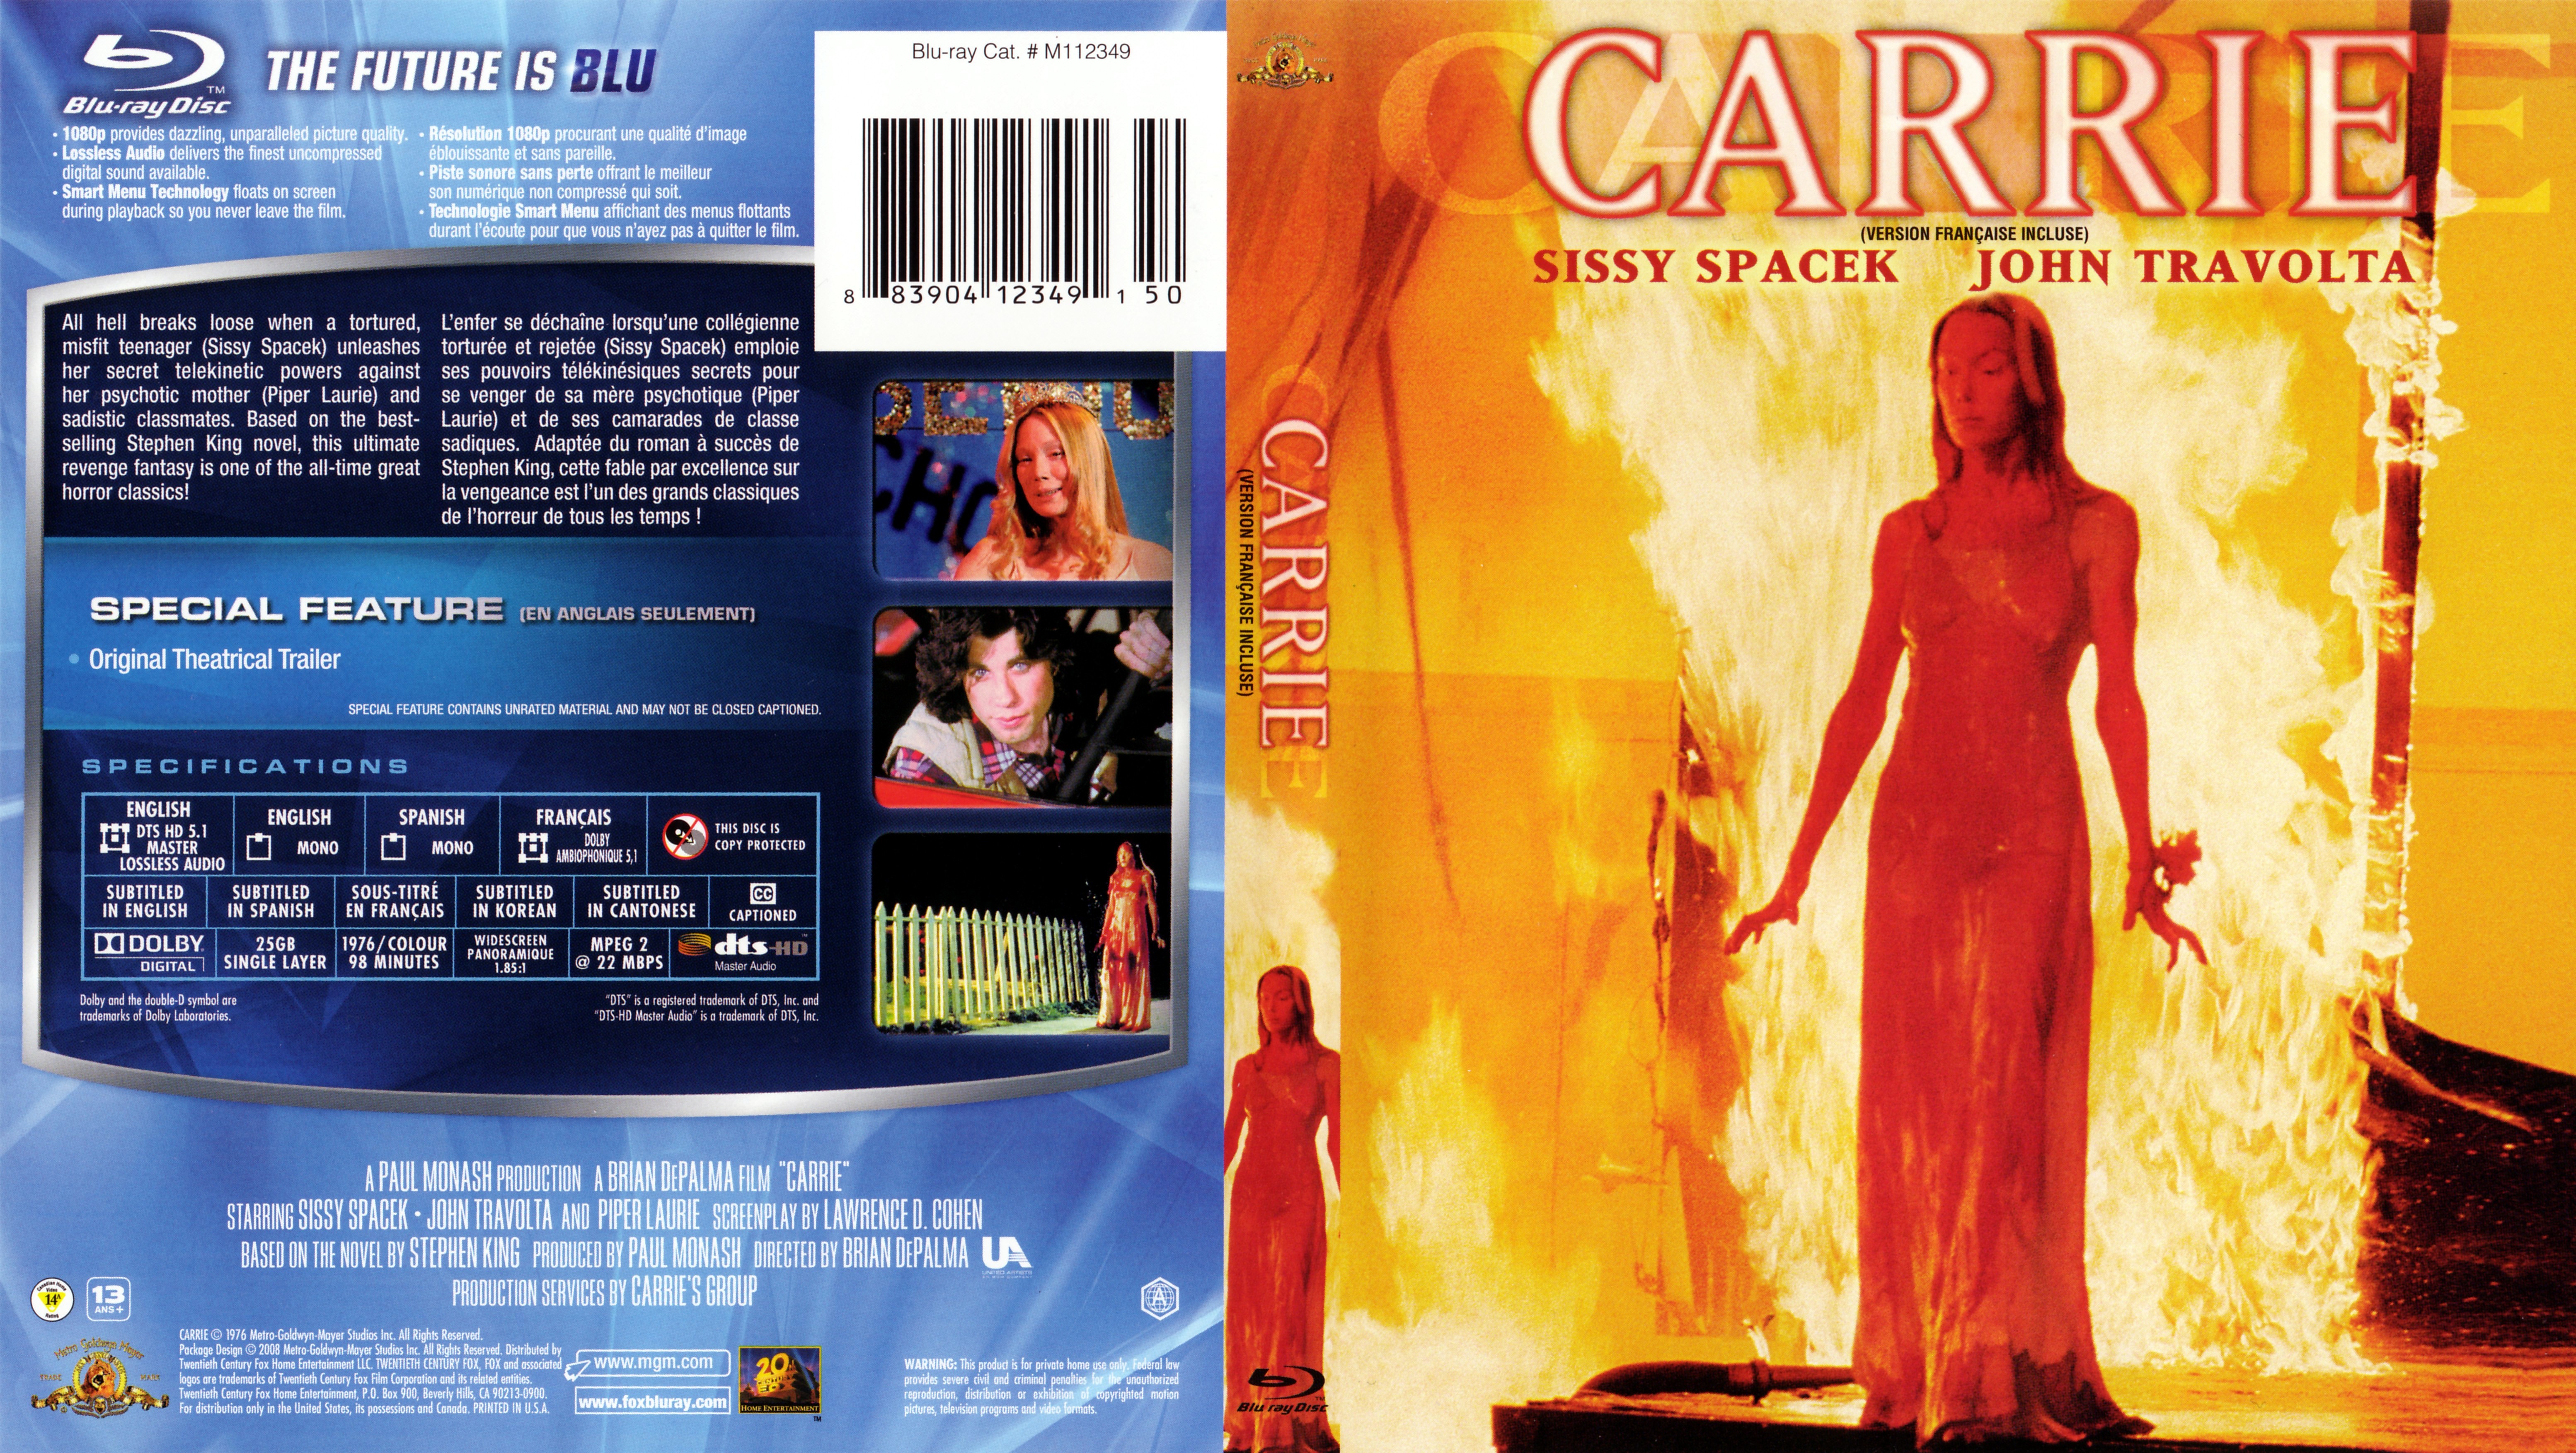 Jaquette DVD Carrie (Canadienne) (BLU-RAY) v2